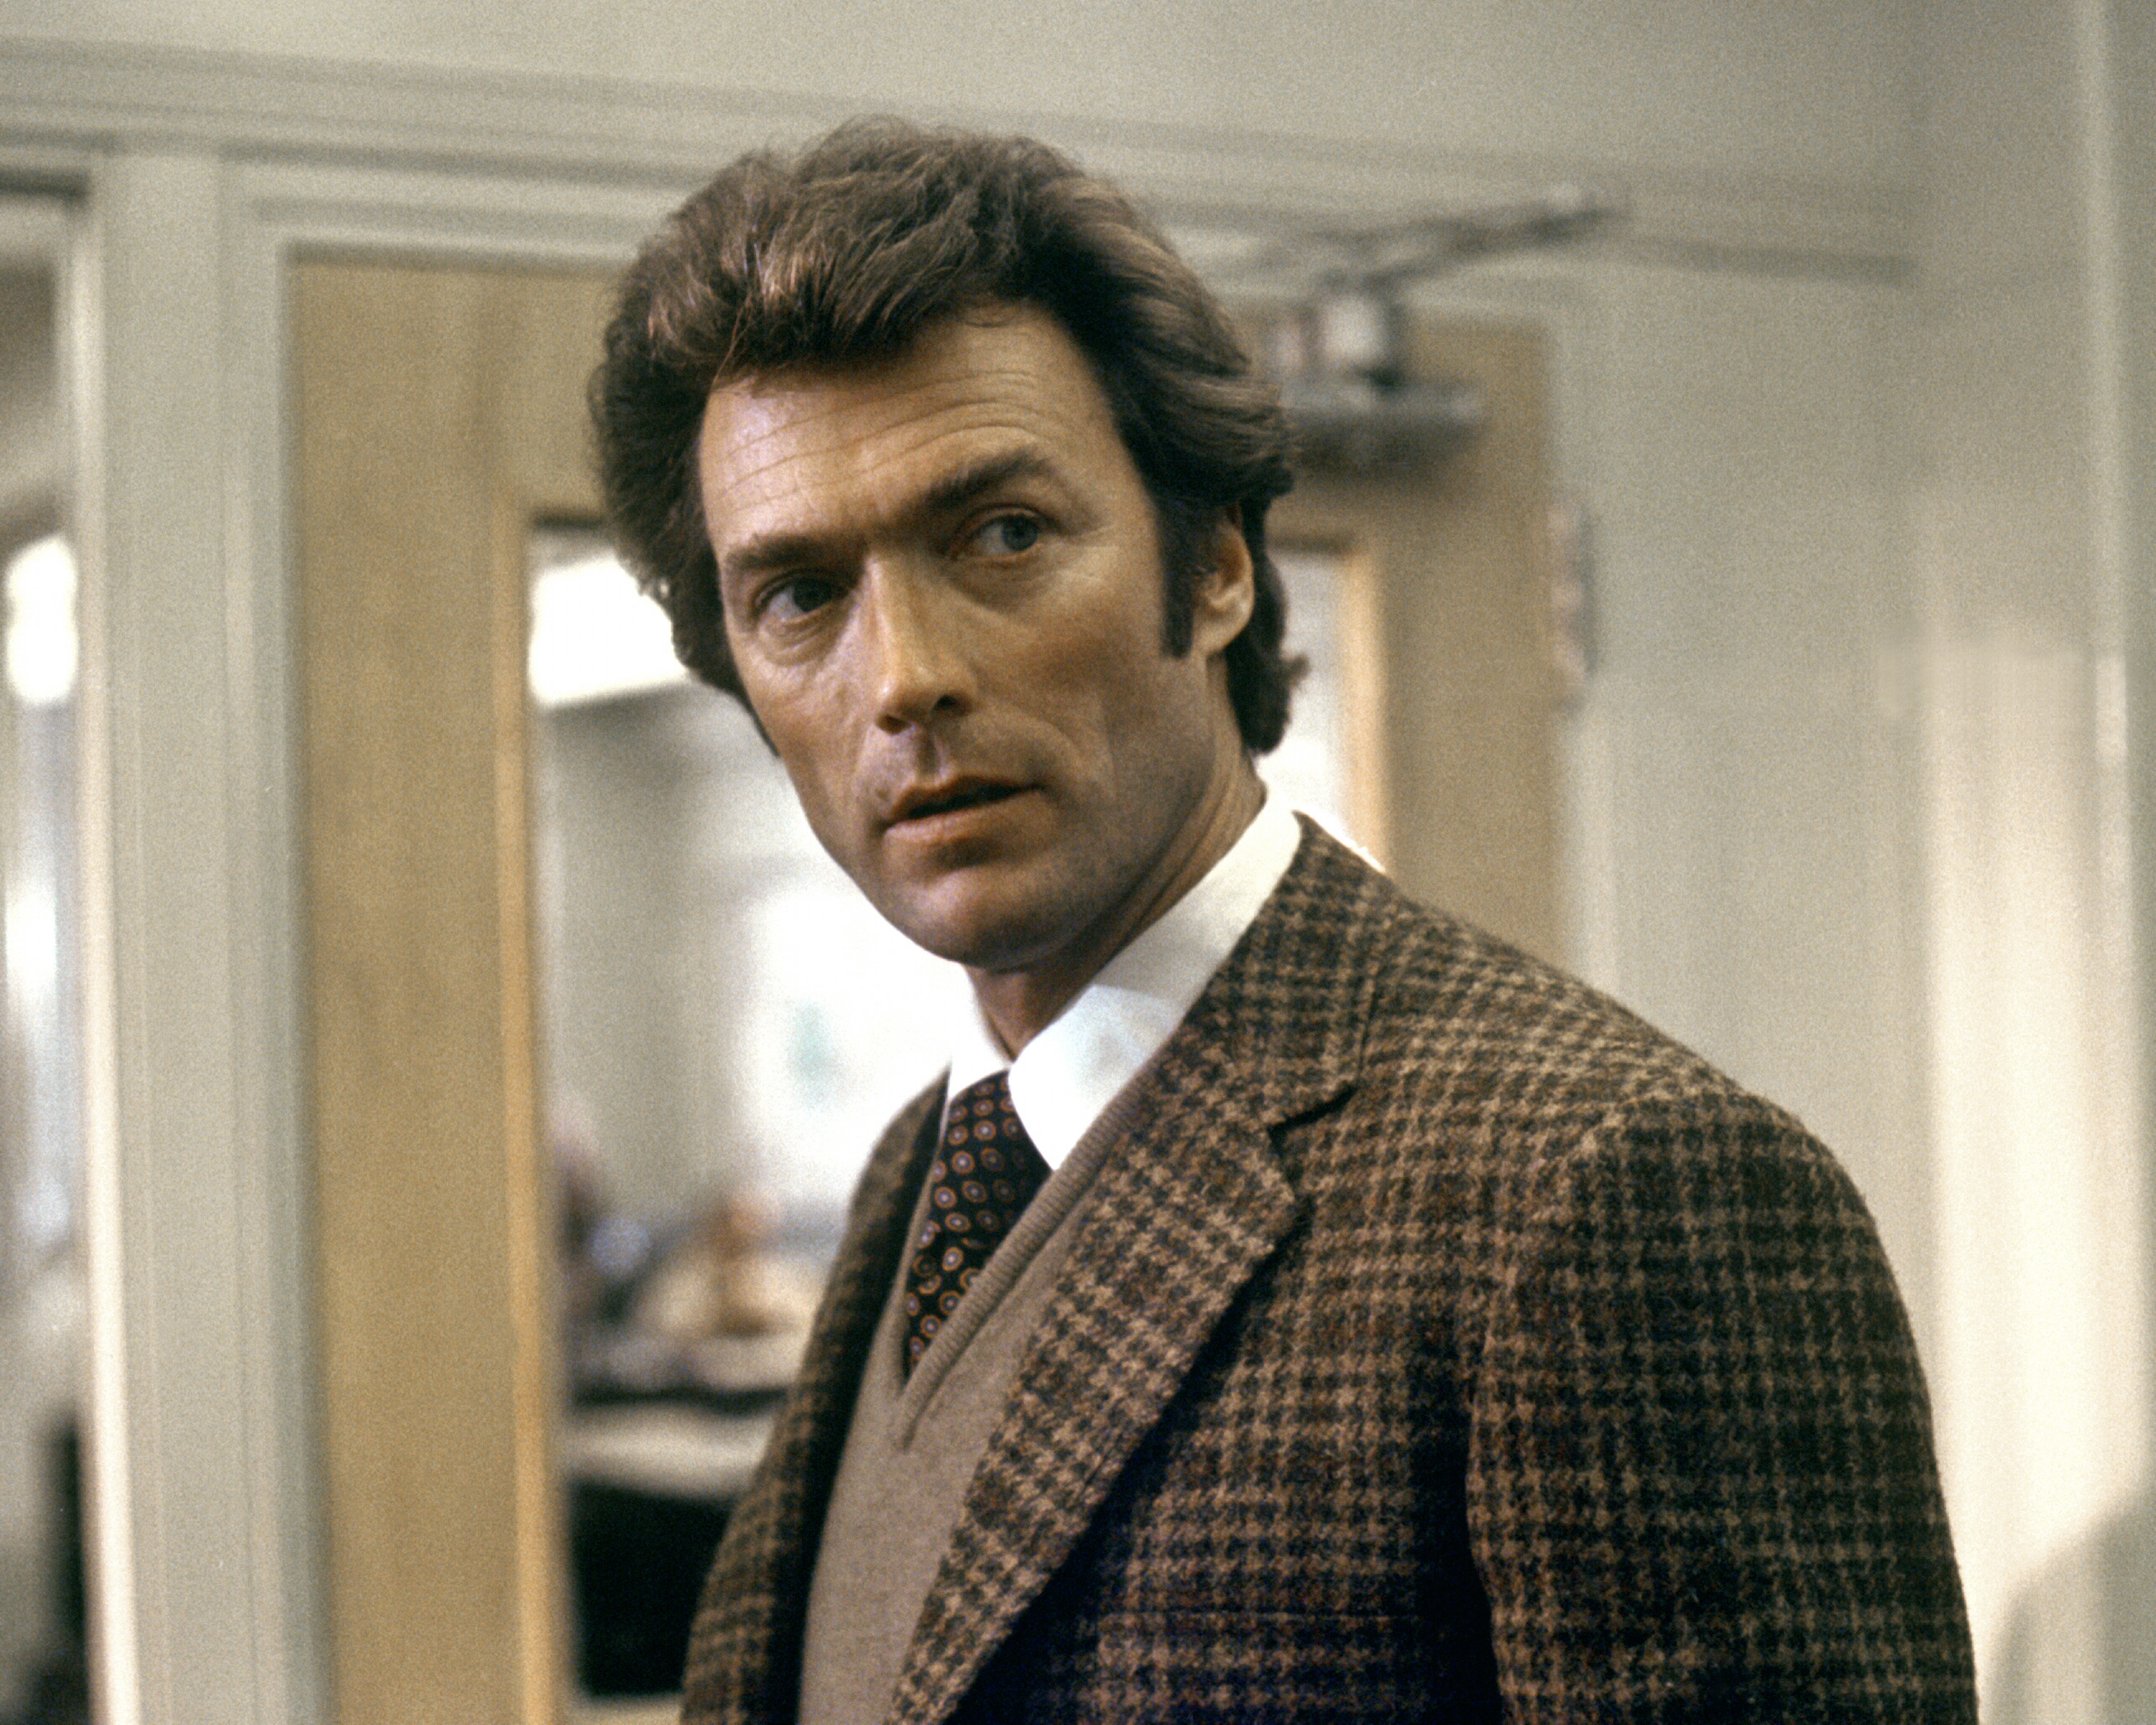 Clint Eastwood in a film scene from his early career